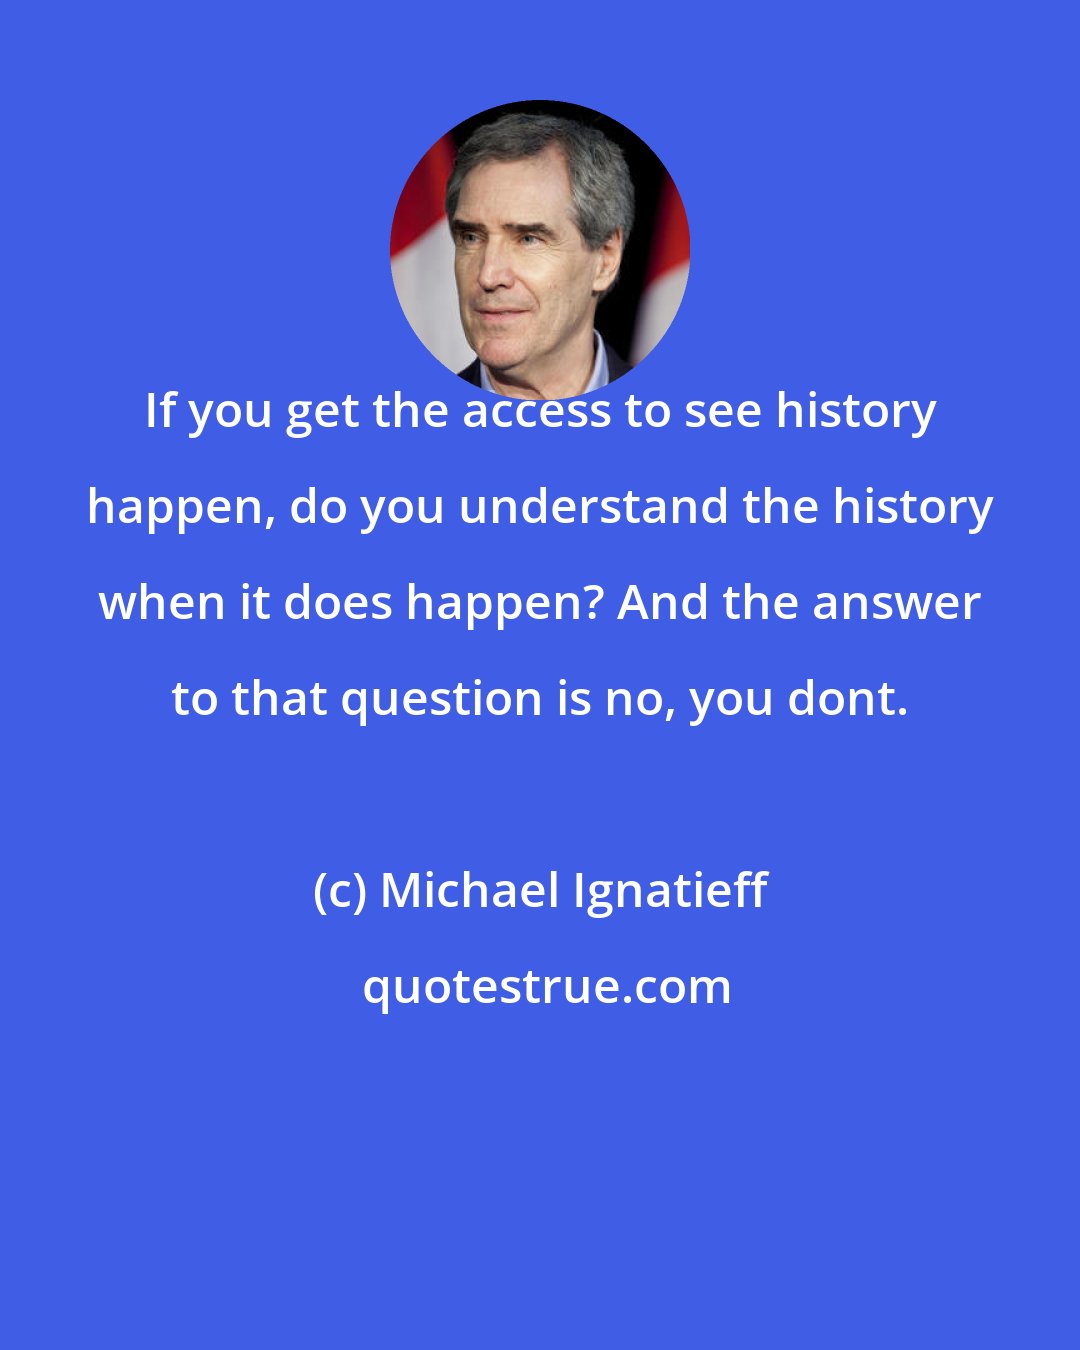 Michael Ignatieff: If you get the access to see history happen, do you understand the history when it does happen? And the answer to that question is no, you dont.